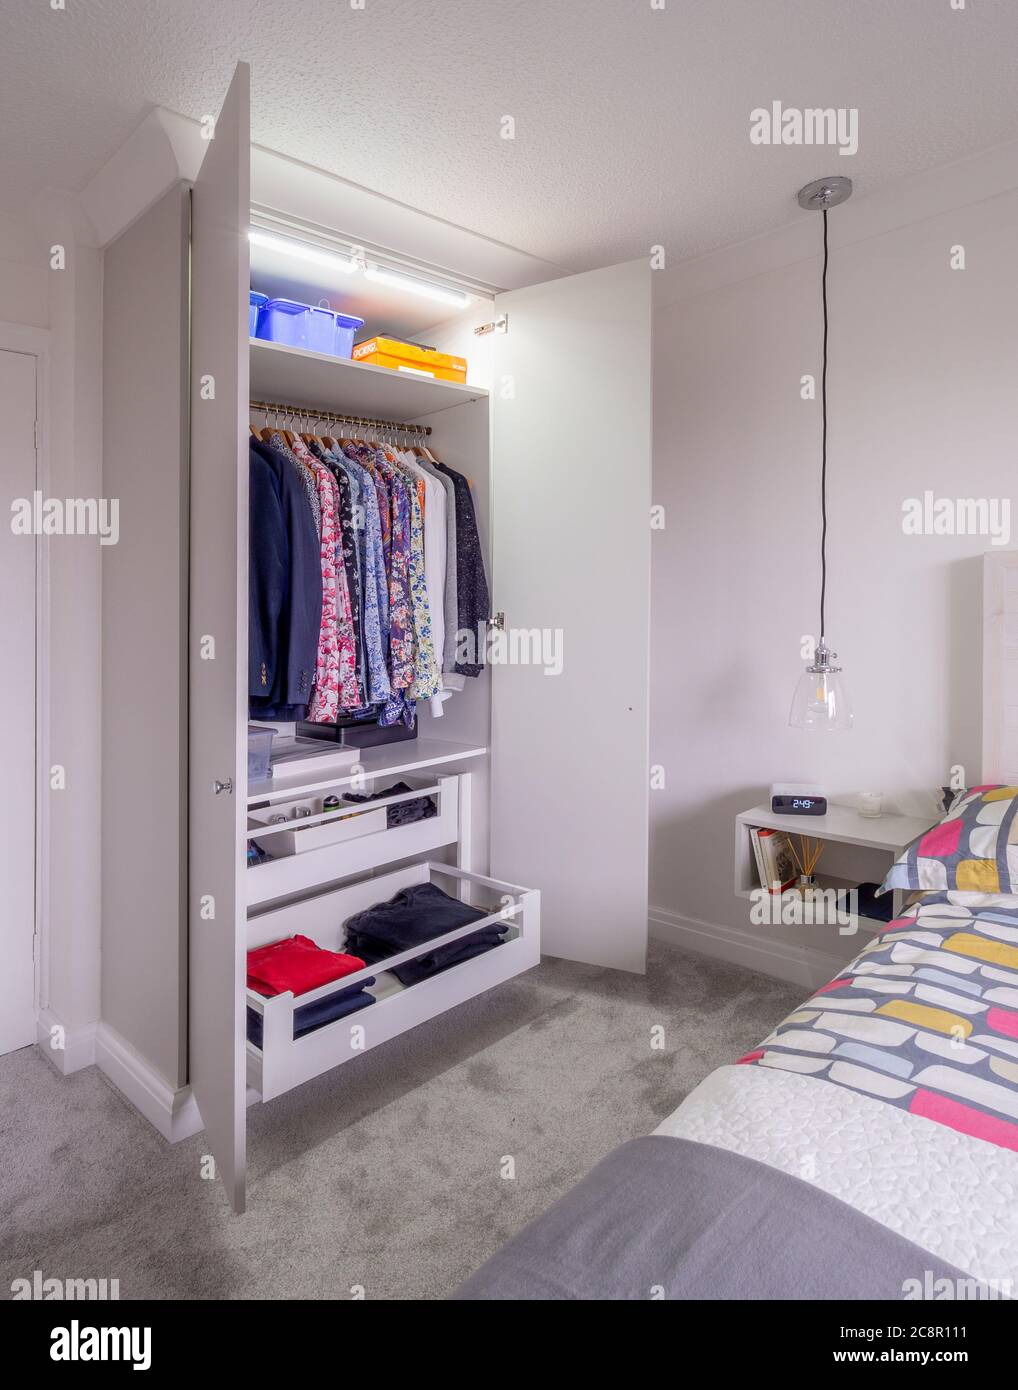 Bedroom interior with open wardrobes showing clothes storage Stock Photo